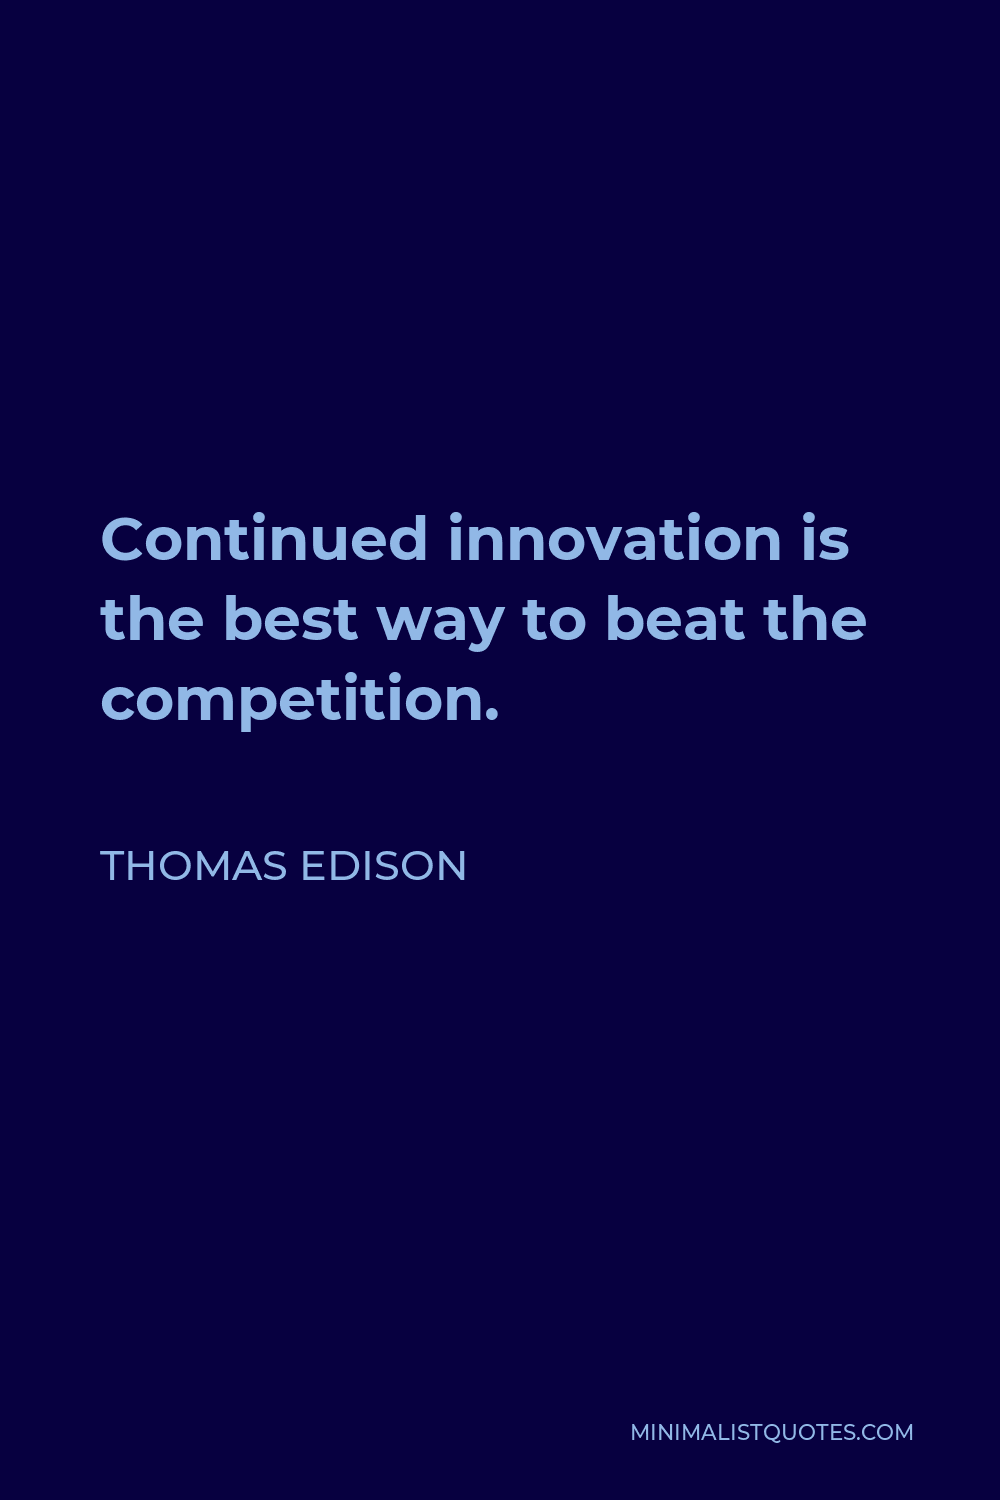 Thomas Edison Quote - Continued innovation is the best way to beat the competition.